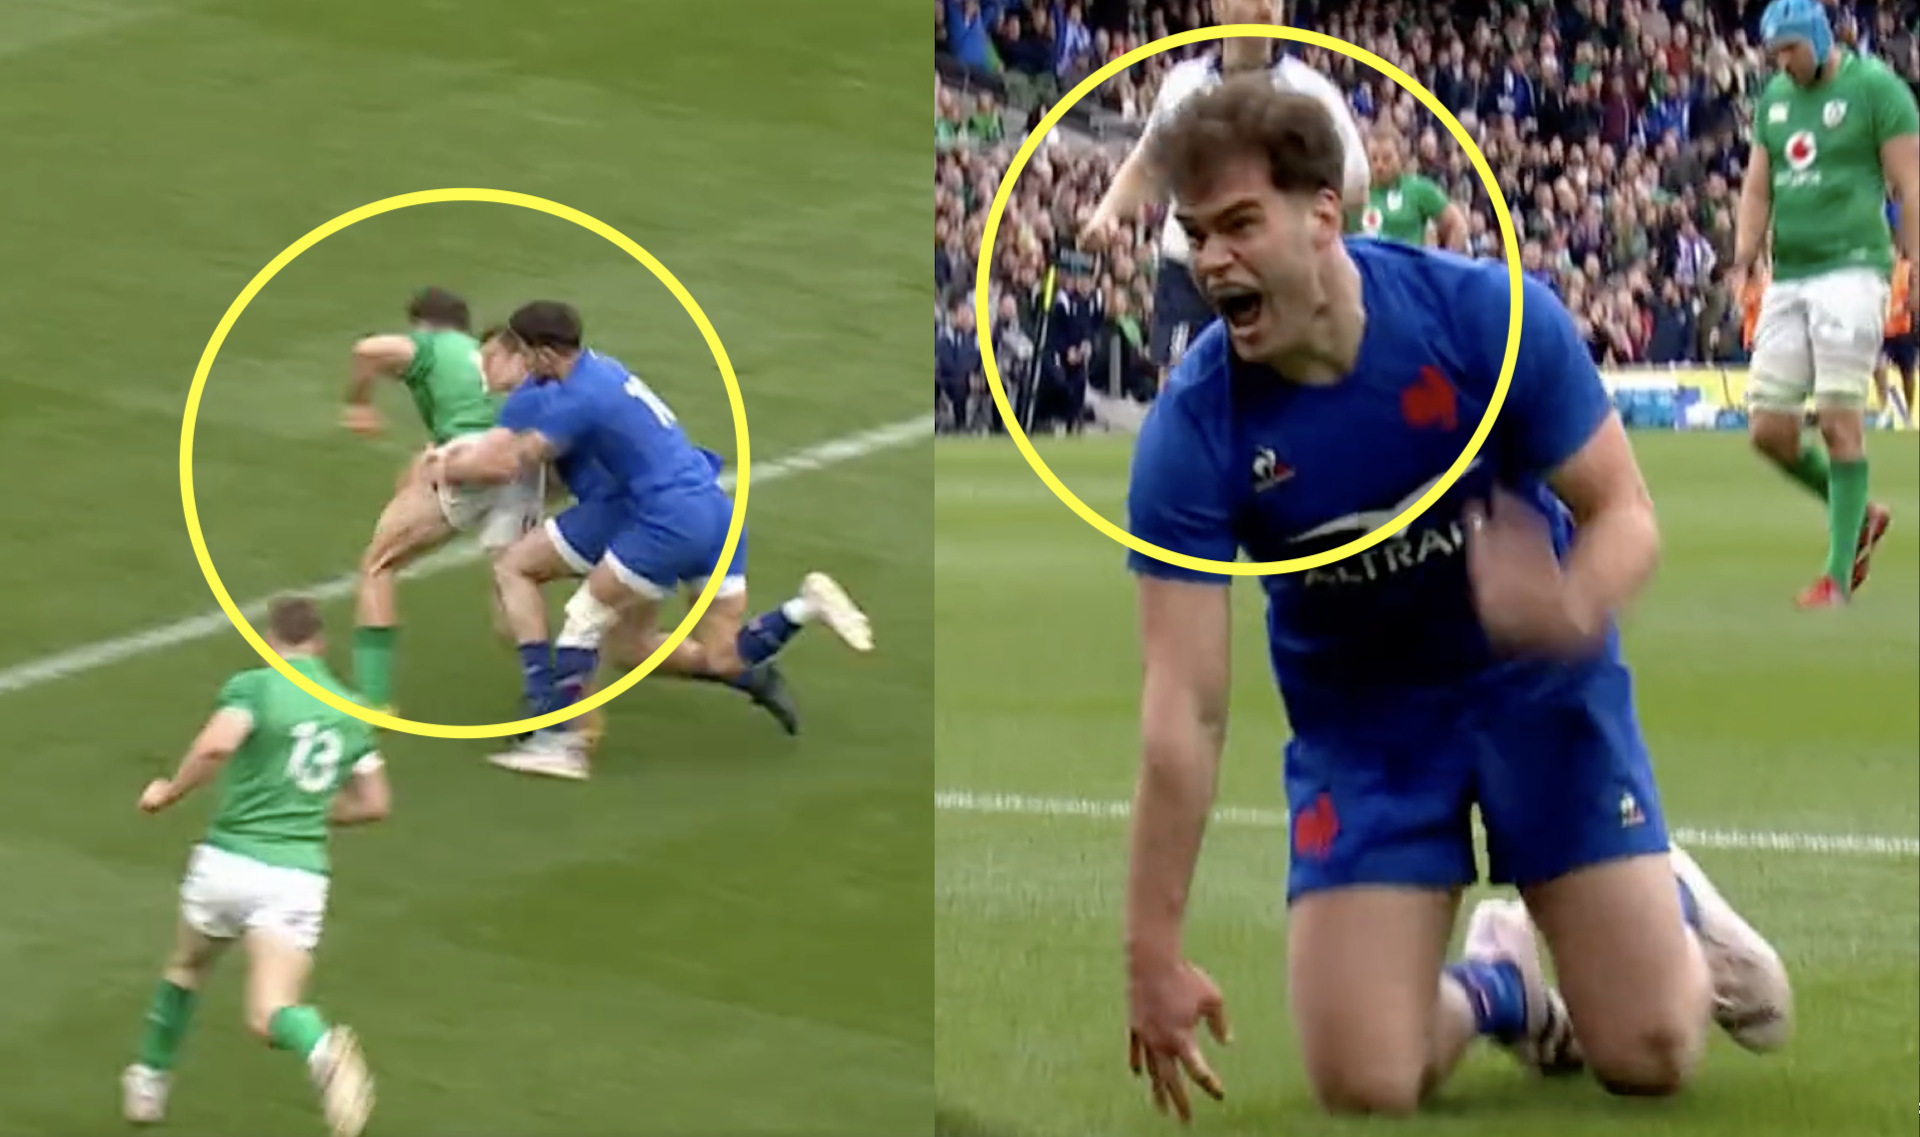 Dark day for southern hemisphere as rugby peaks in Ireland vs France match